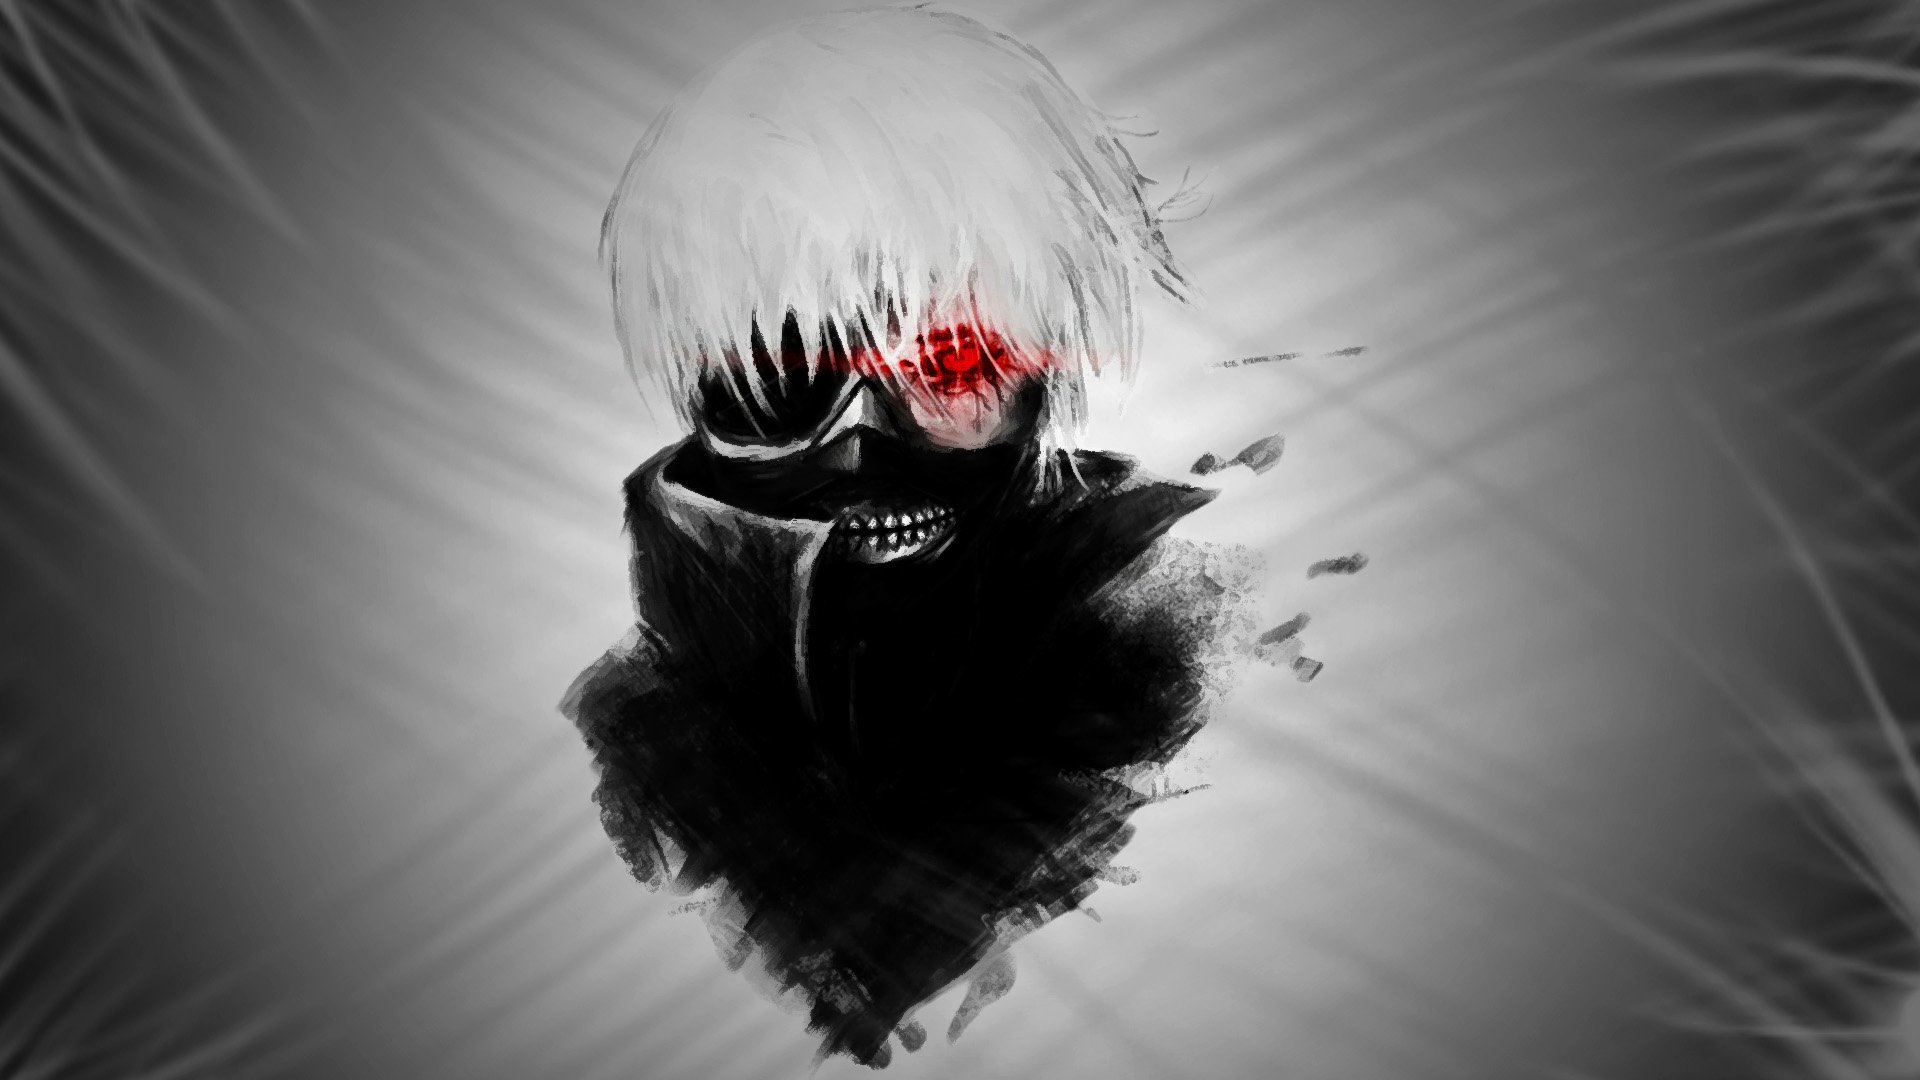 Tokyo Ghoul HD Wallpaper | Background Image | 1920x1080 ...